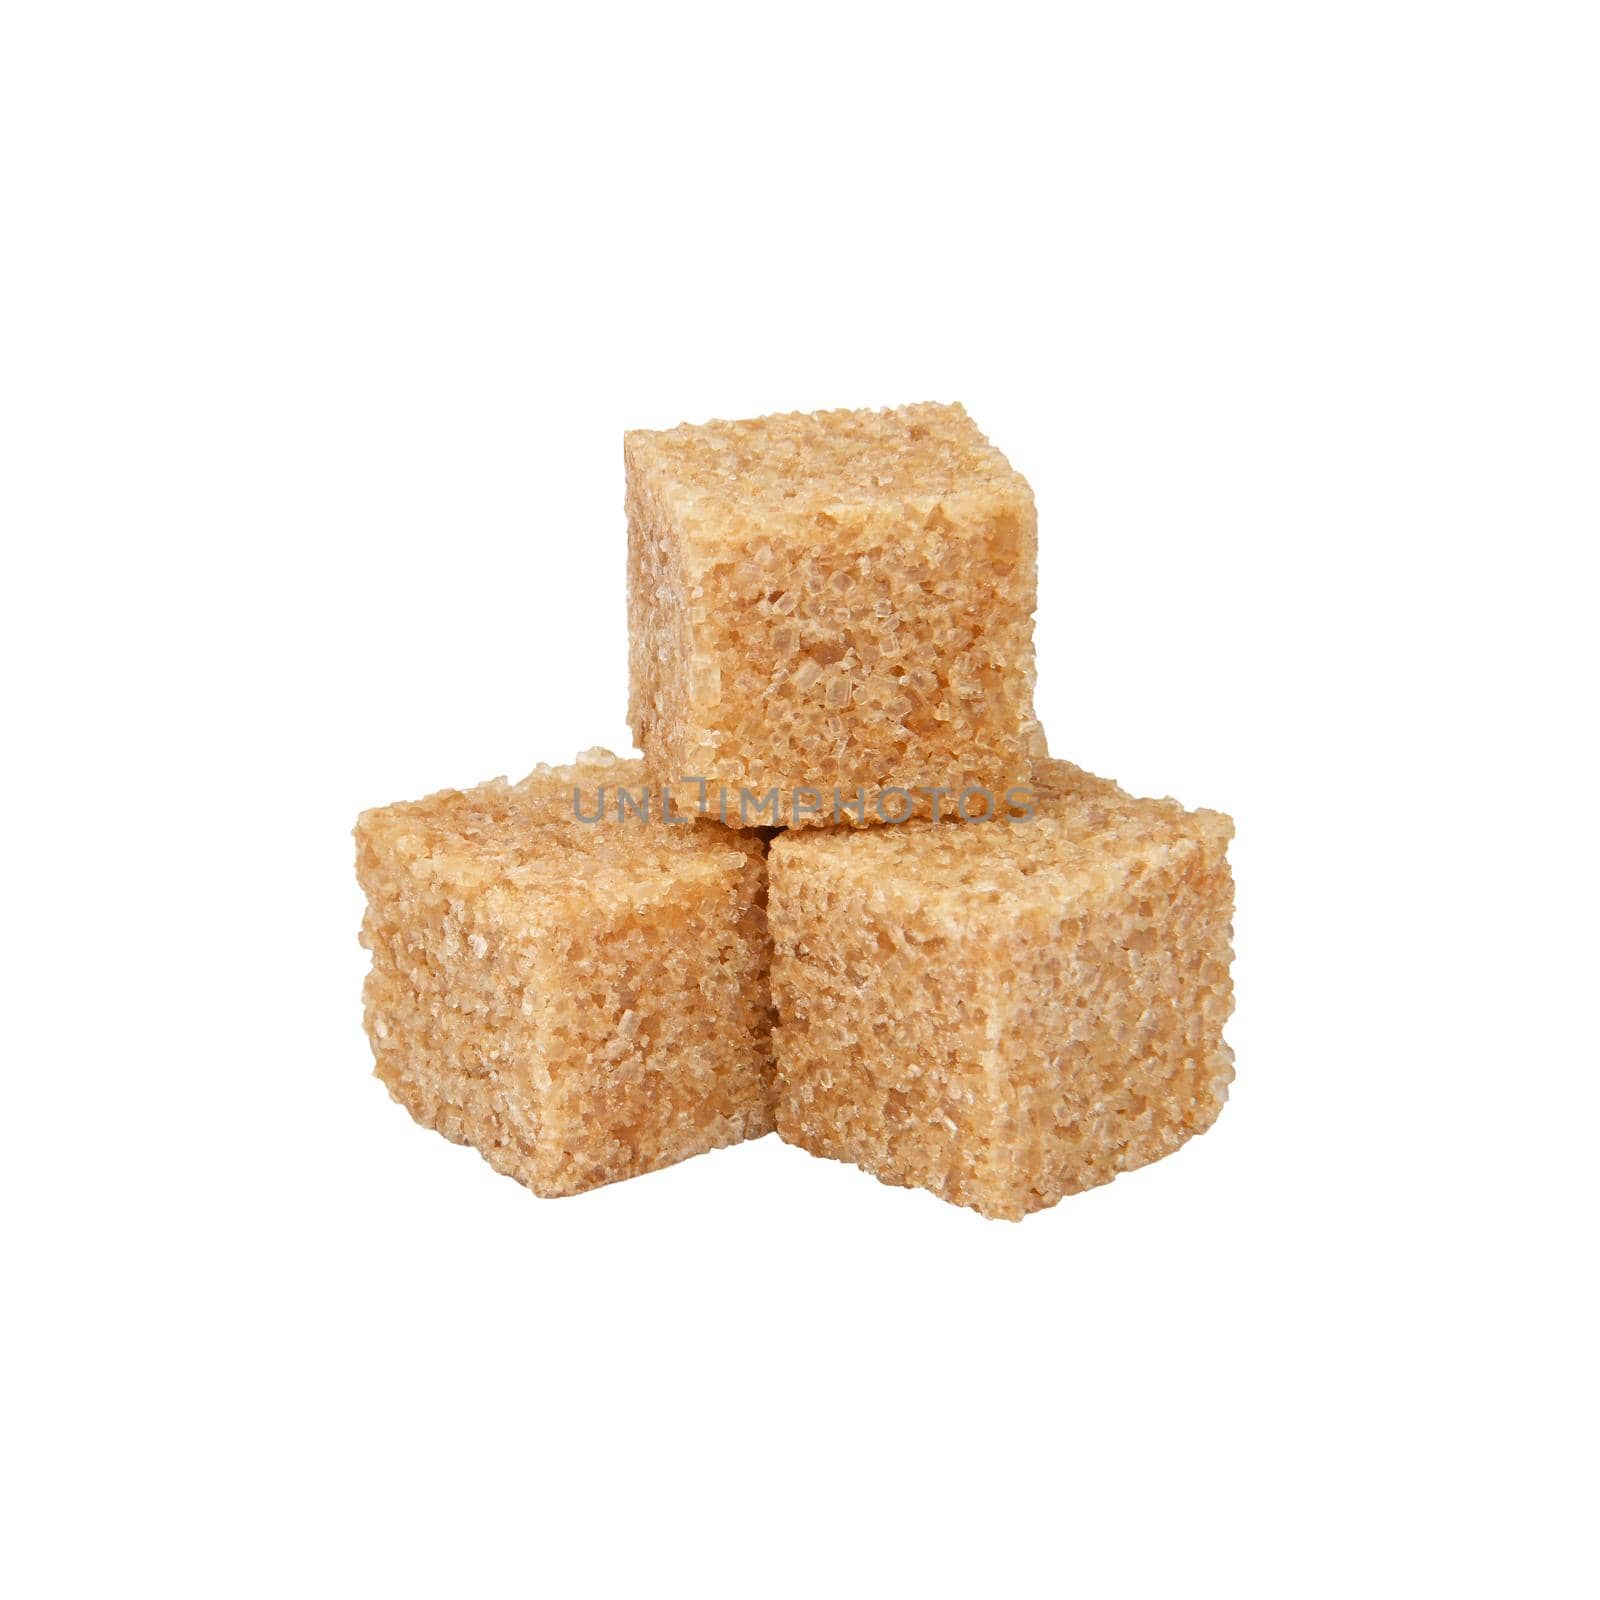 Close up group of brown demerara sugar cubes isolated on white background, side view